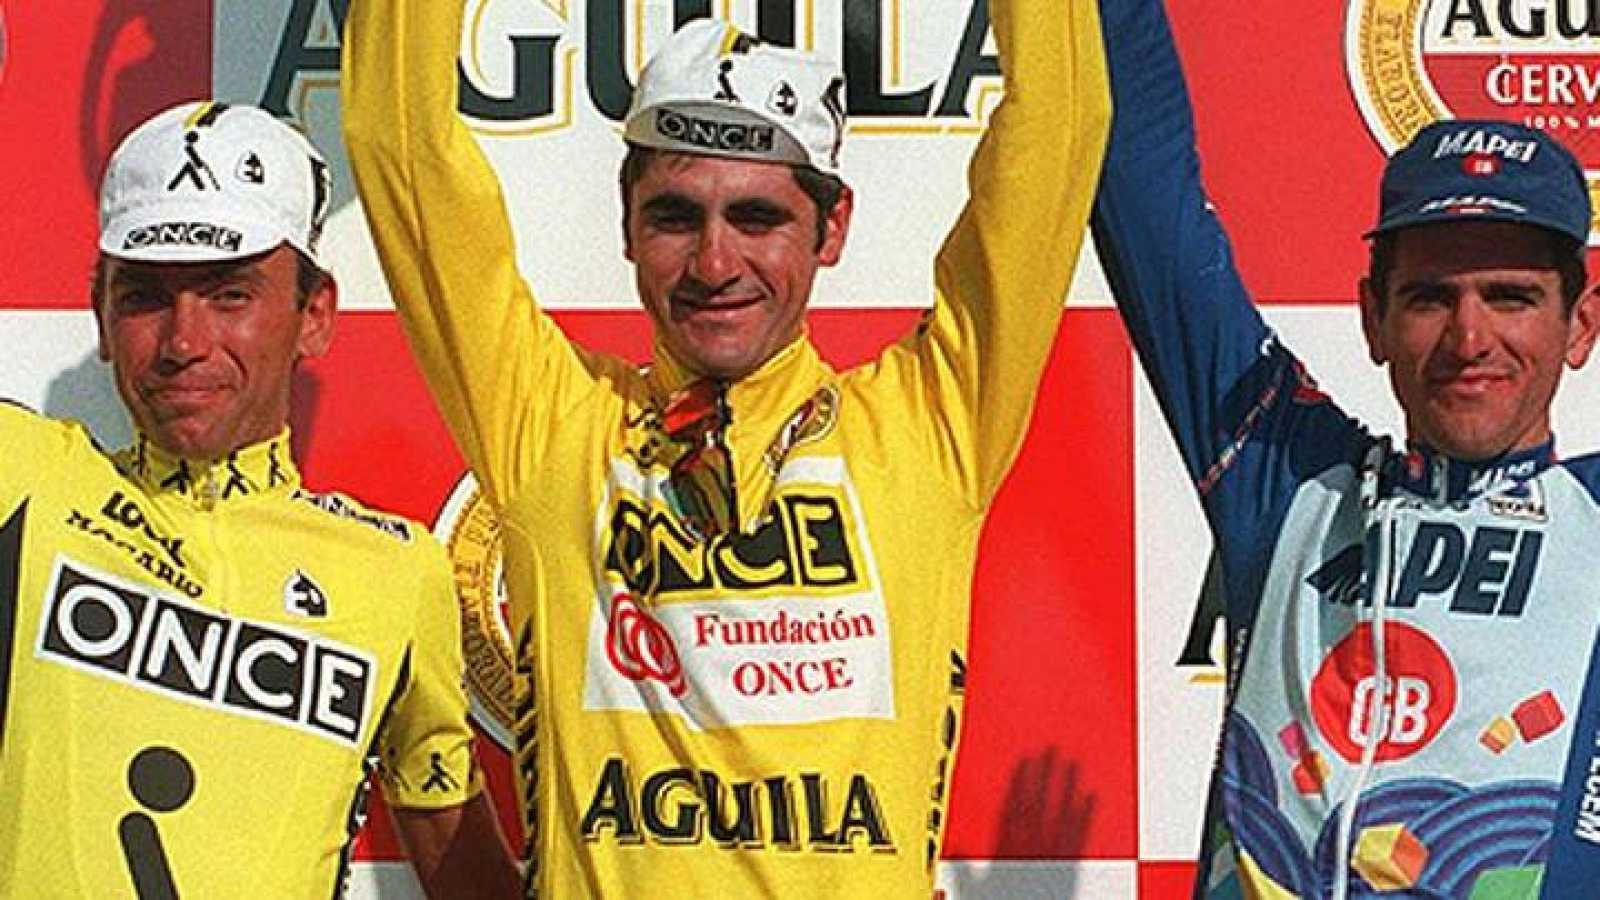 The first three riders of the general classification at the Vuelta a Espana 1995